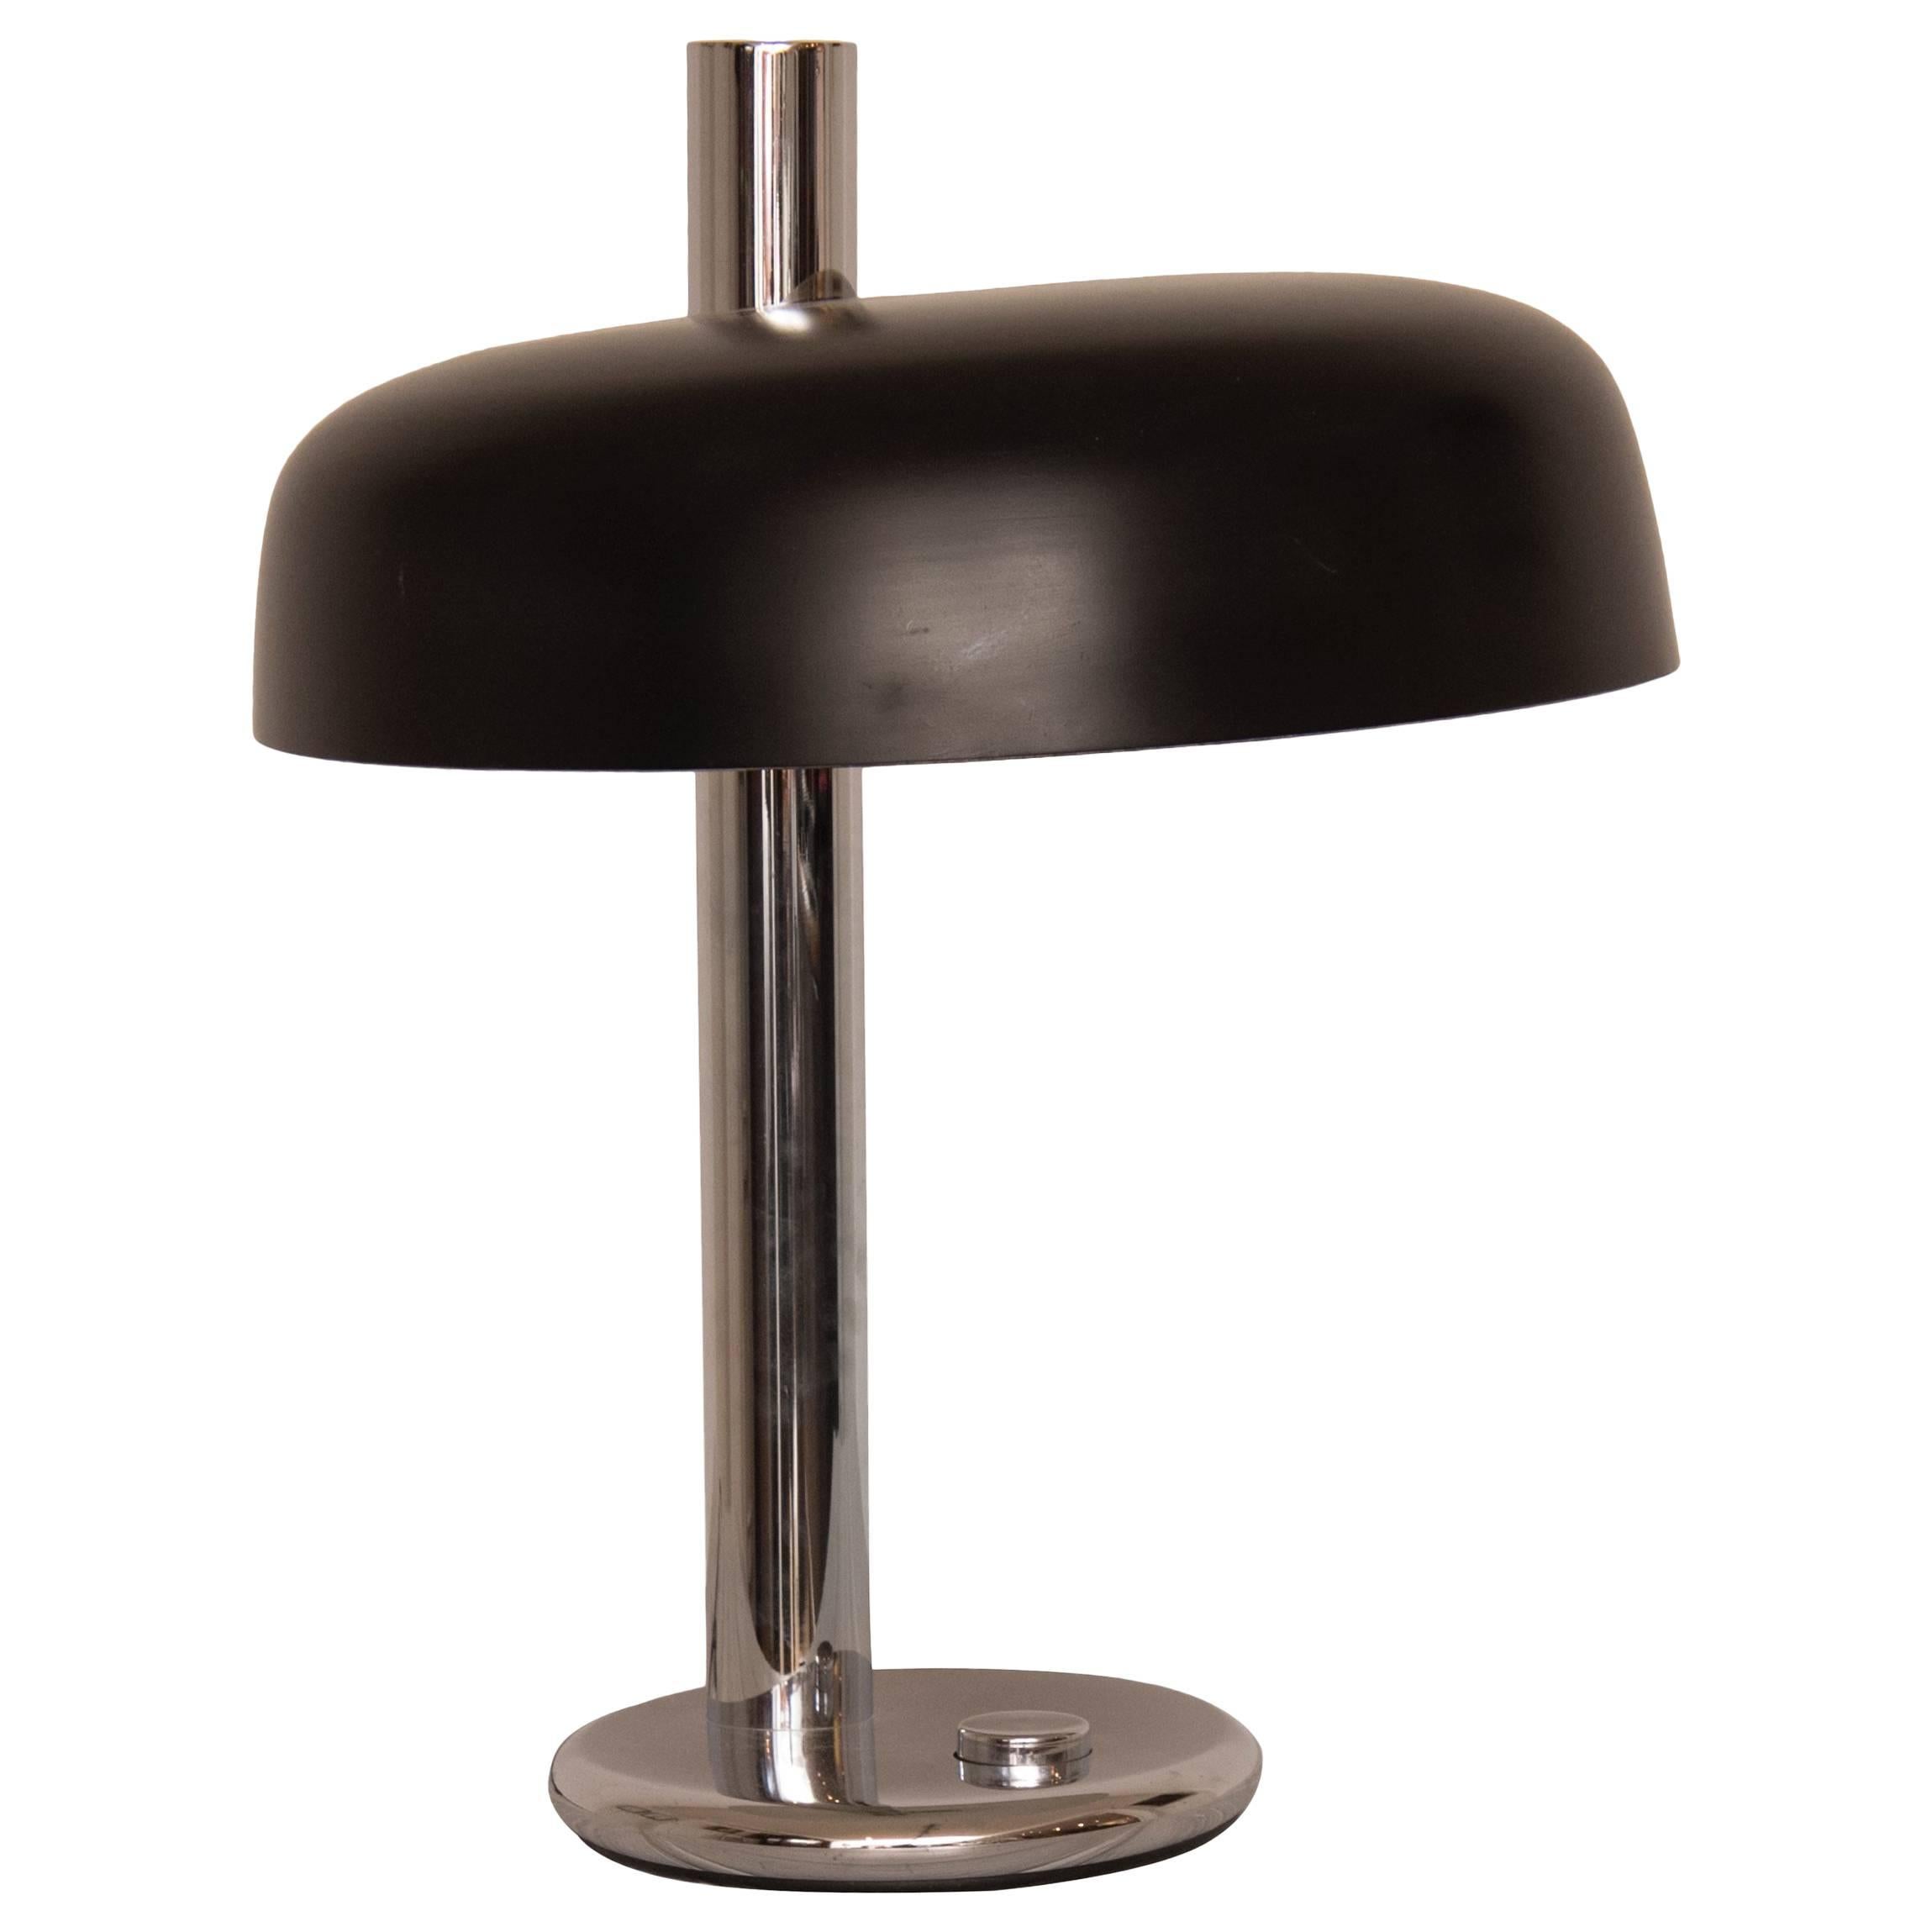 Midcentury Table Lamp by Hillebrand